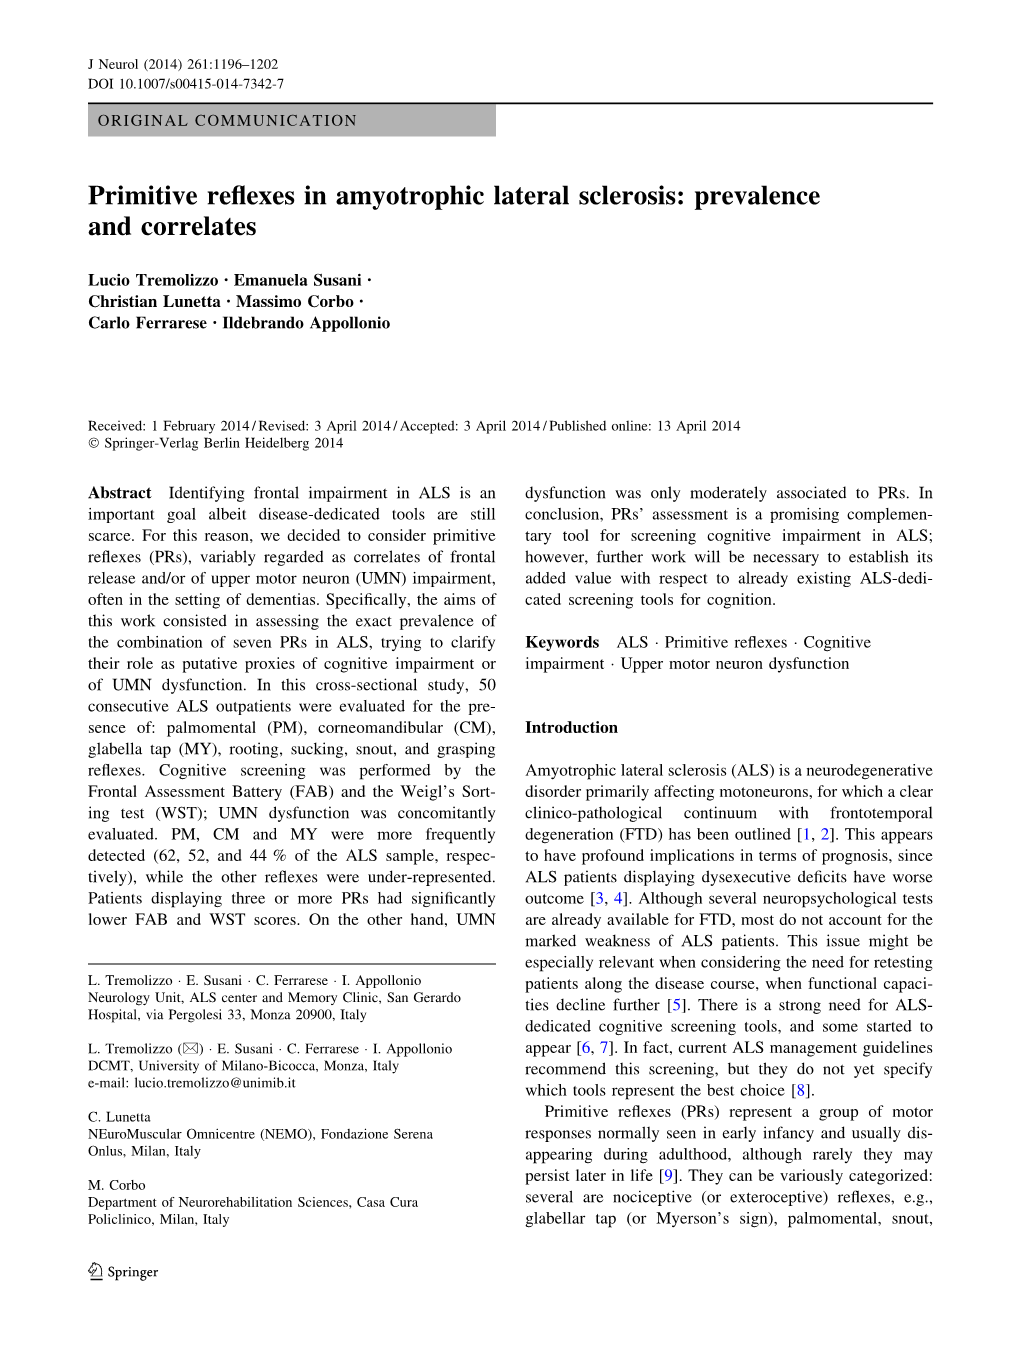 Primitive Reflexes in Amyotrophic Lateral Sclerosis: Prevalence And